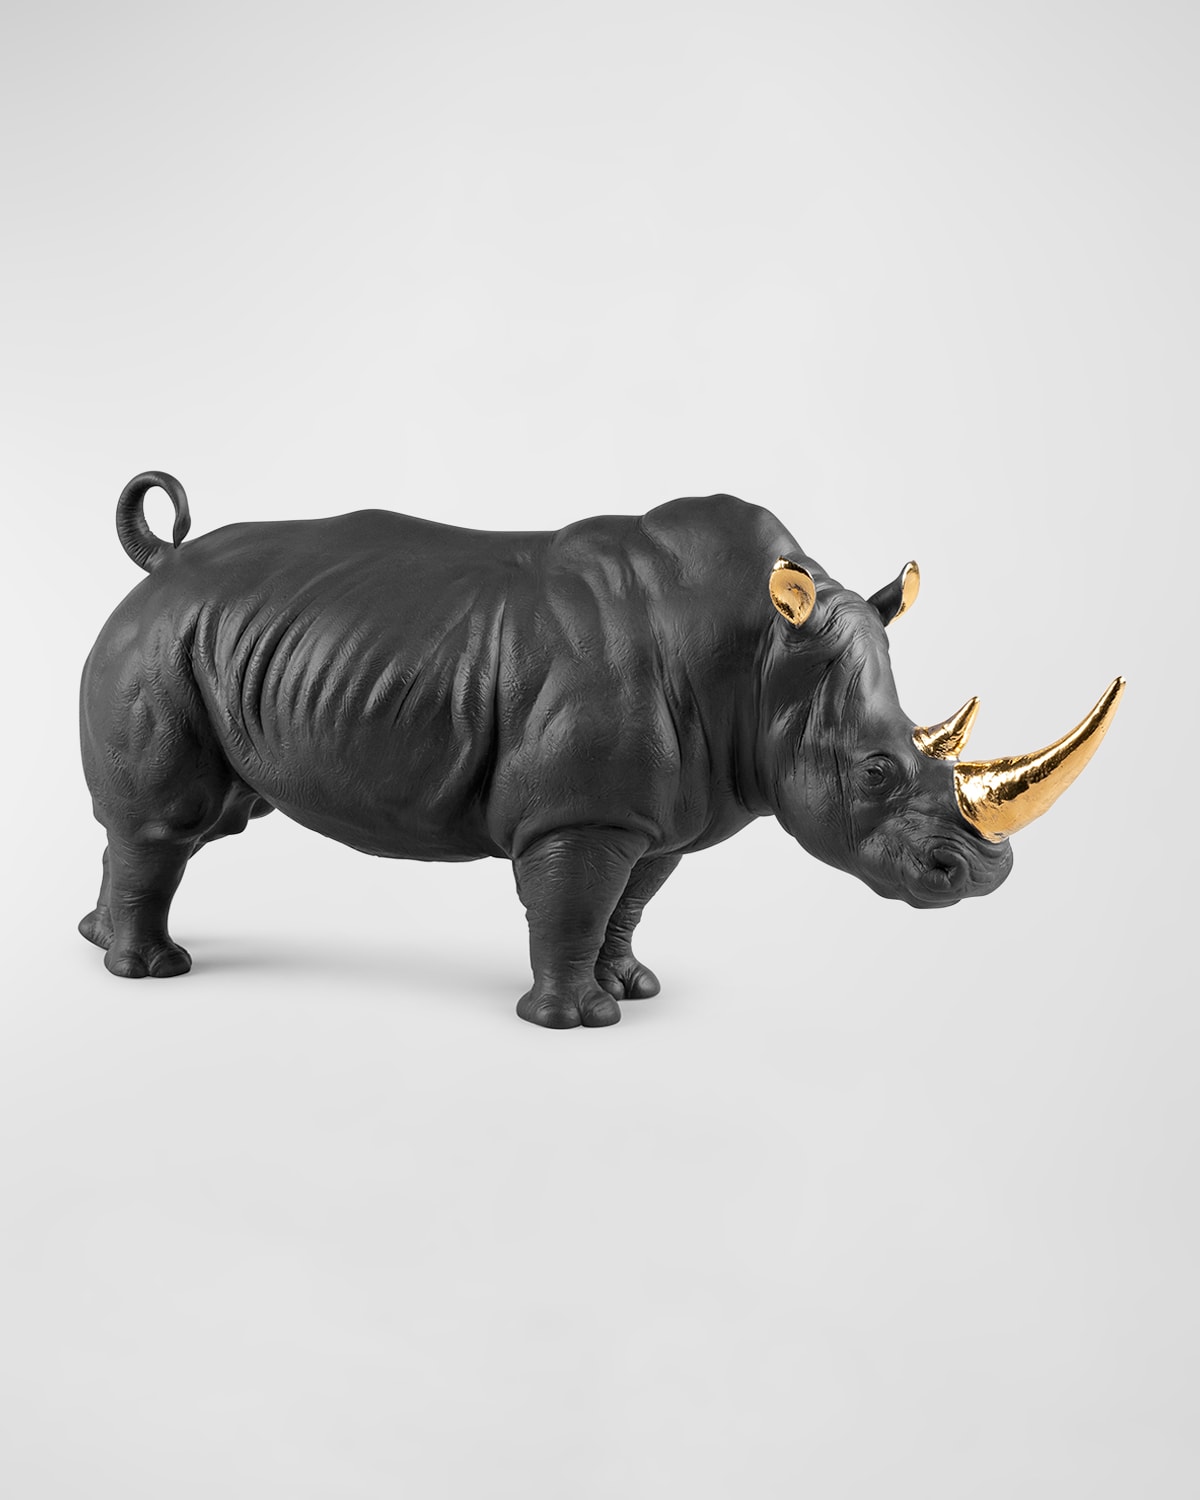 Limited Edition Rhino Sculpture